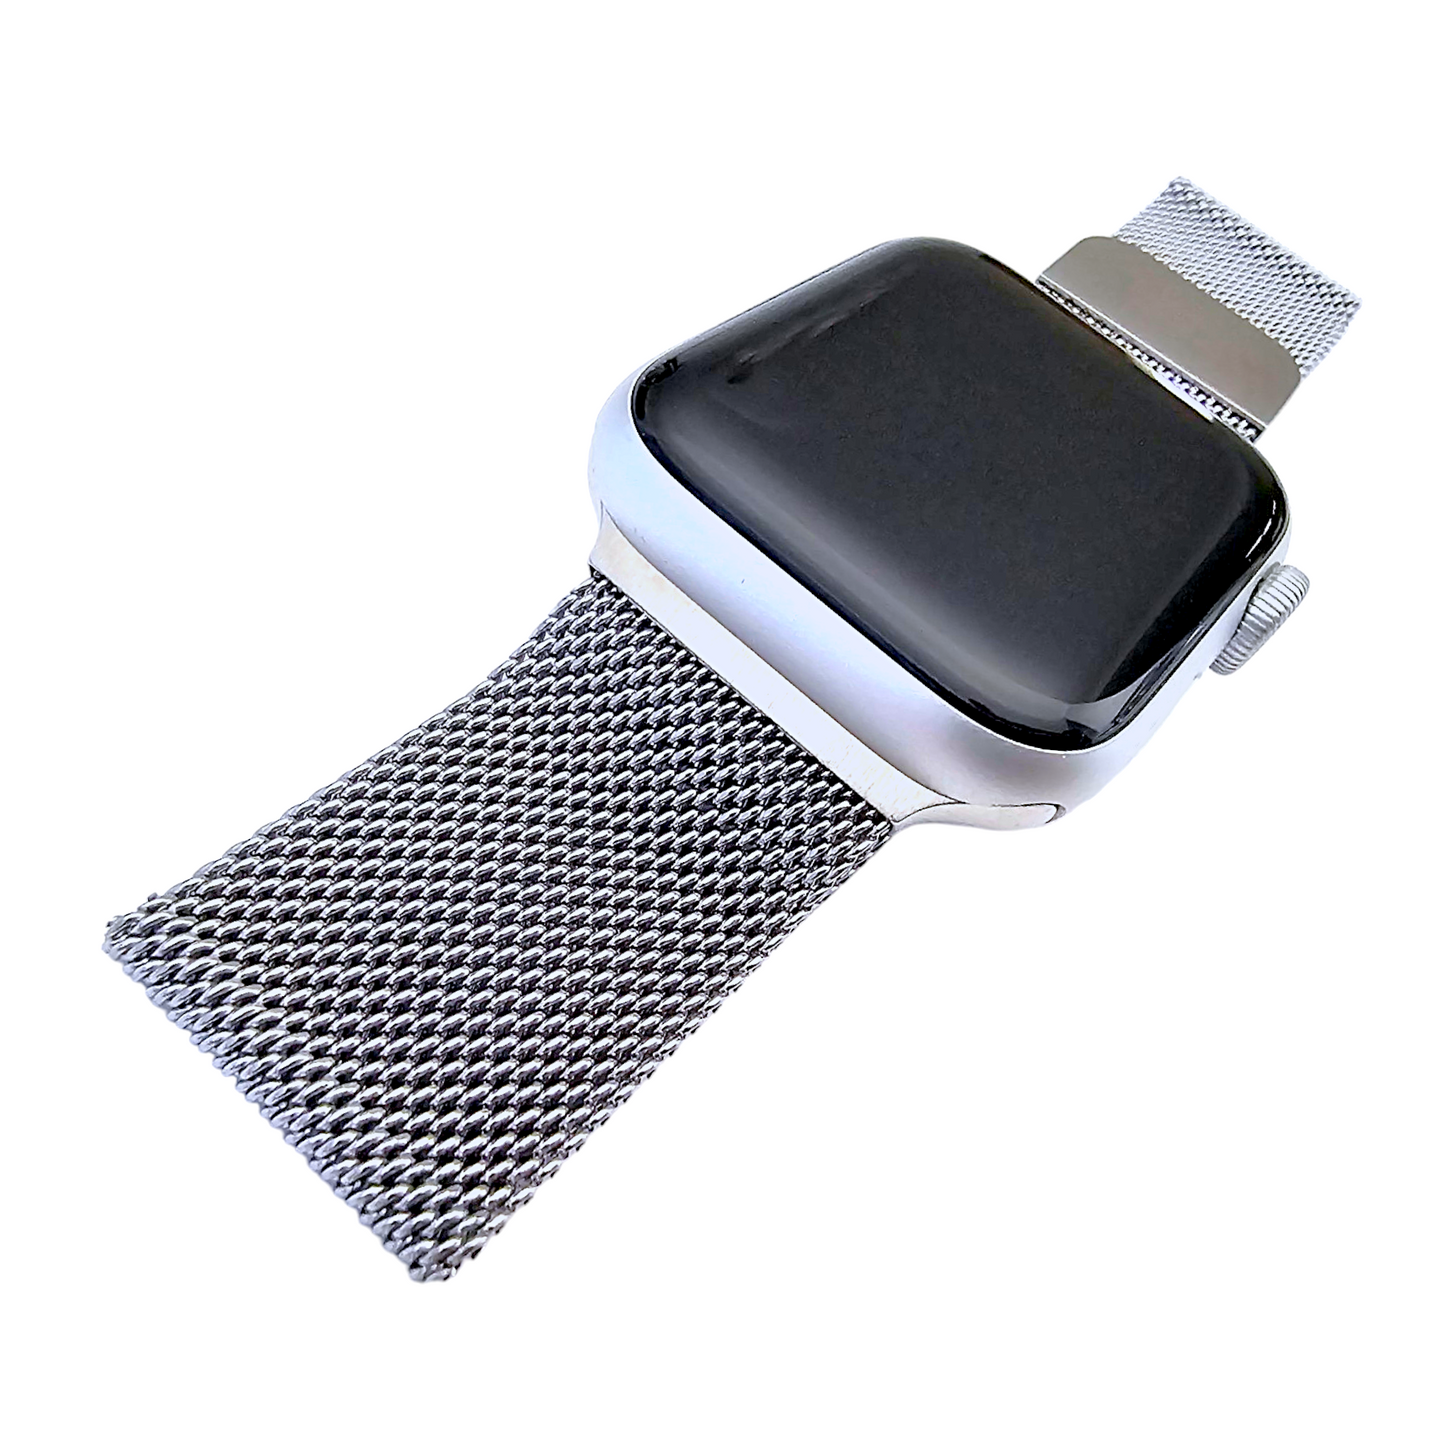 Milanese stainless steel bracelet for Apple Watch Strap Band Silver Coloured